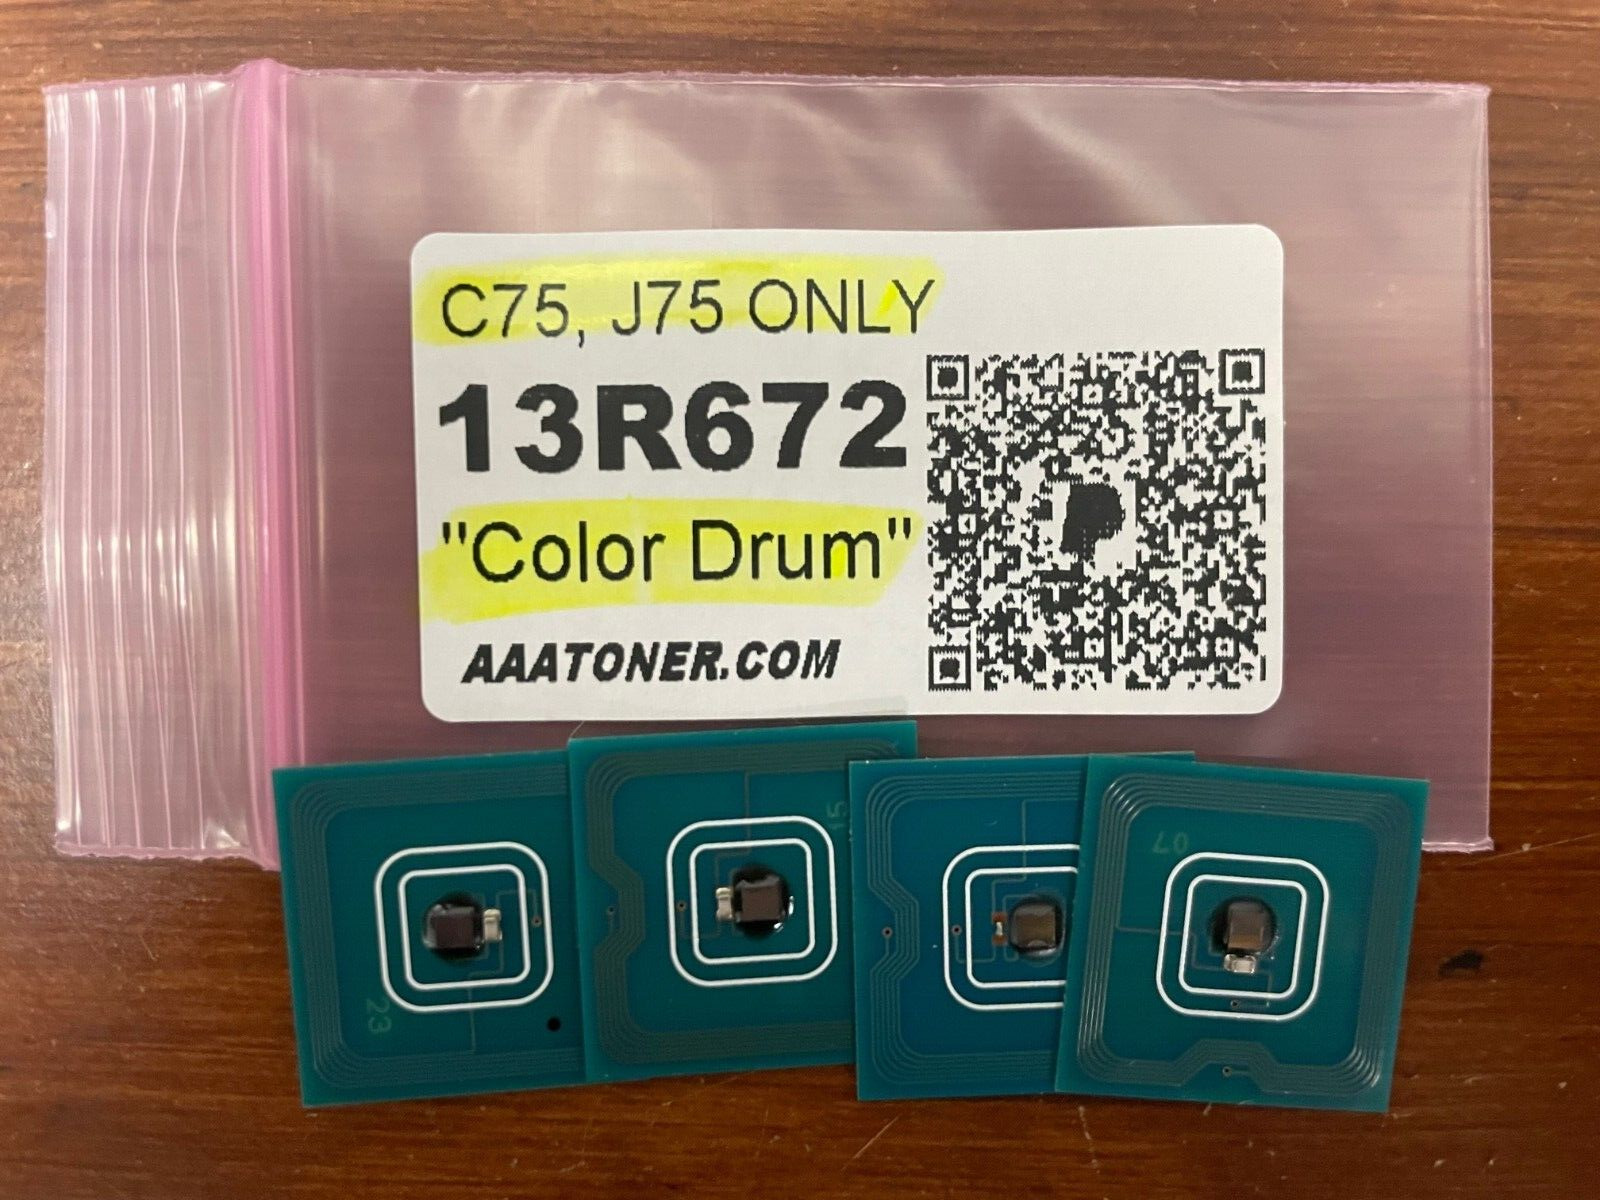 4 x 13R672 Color Drum Chip Refill for Xerox Color C75, J75 Press Printer ONLY 